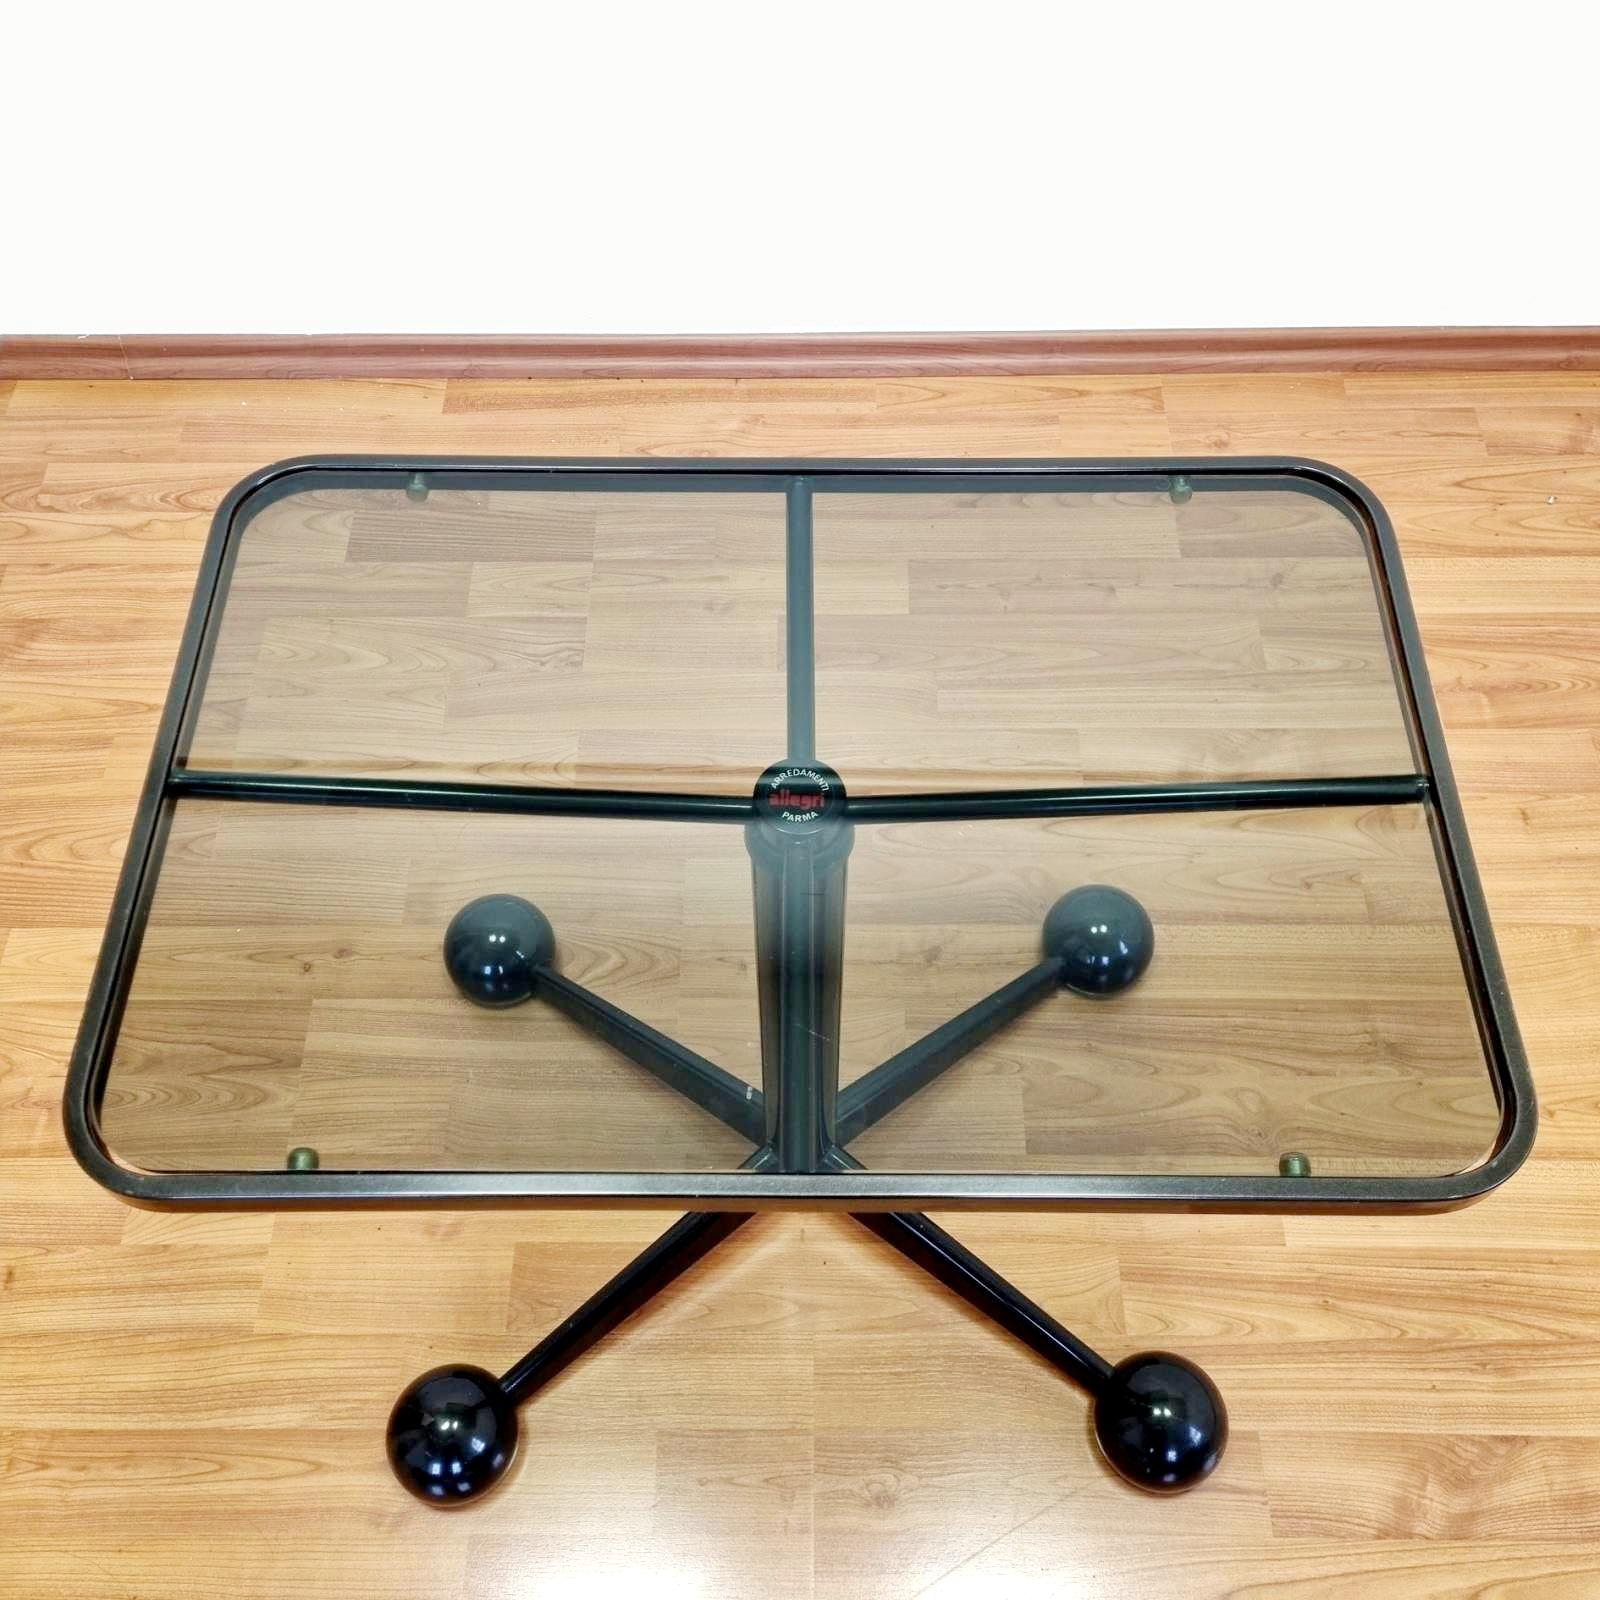 Mid-Century Modern Black Glass and Metal Side Table by Arredamenti Allegri Parma Italy 70s For Sale